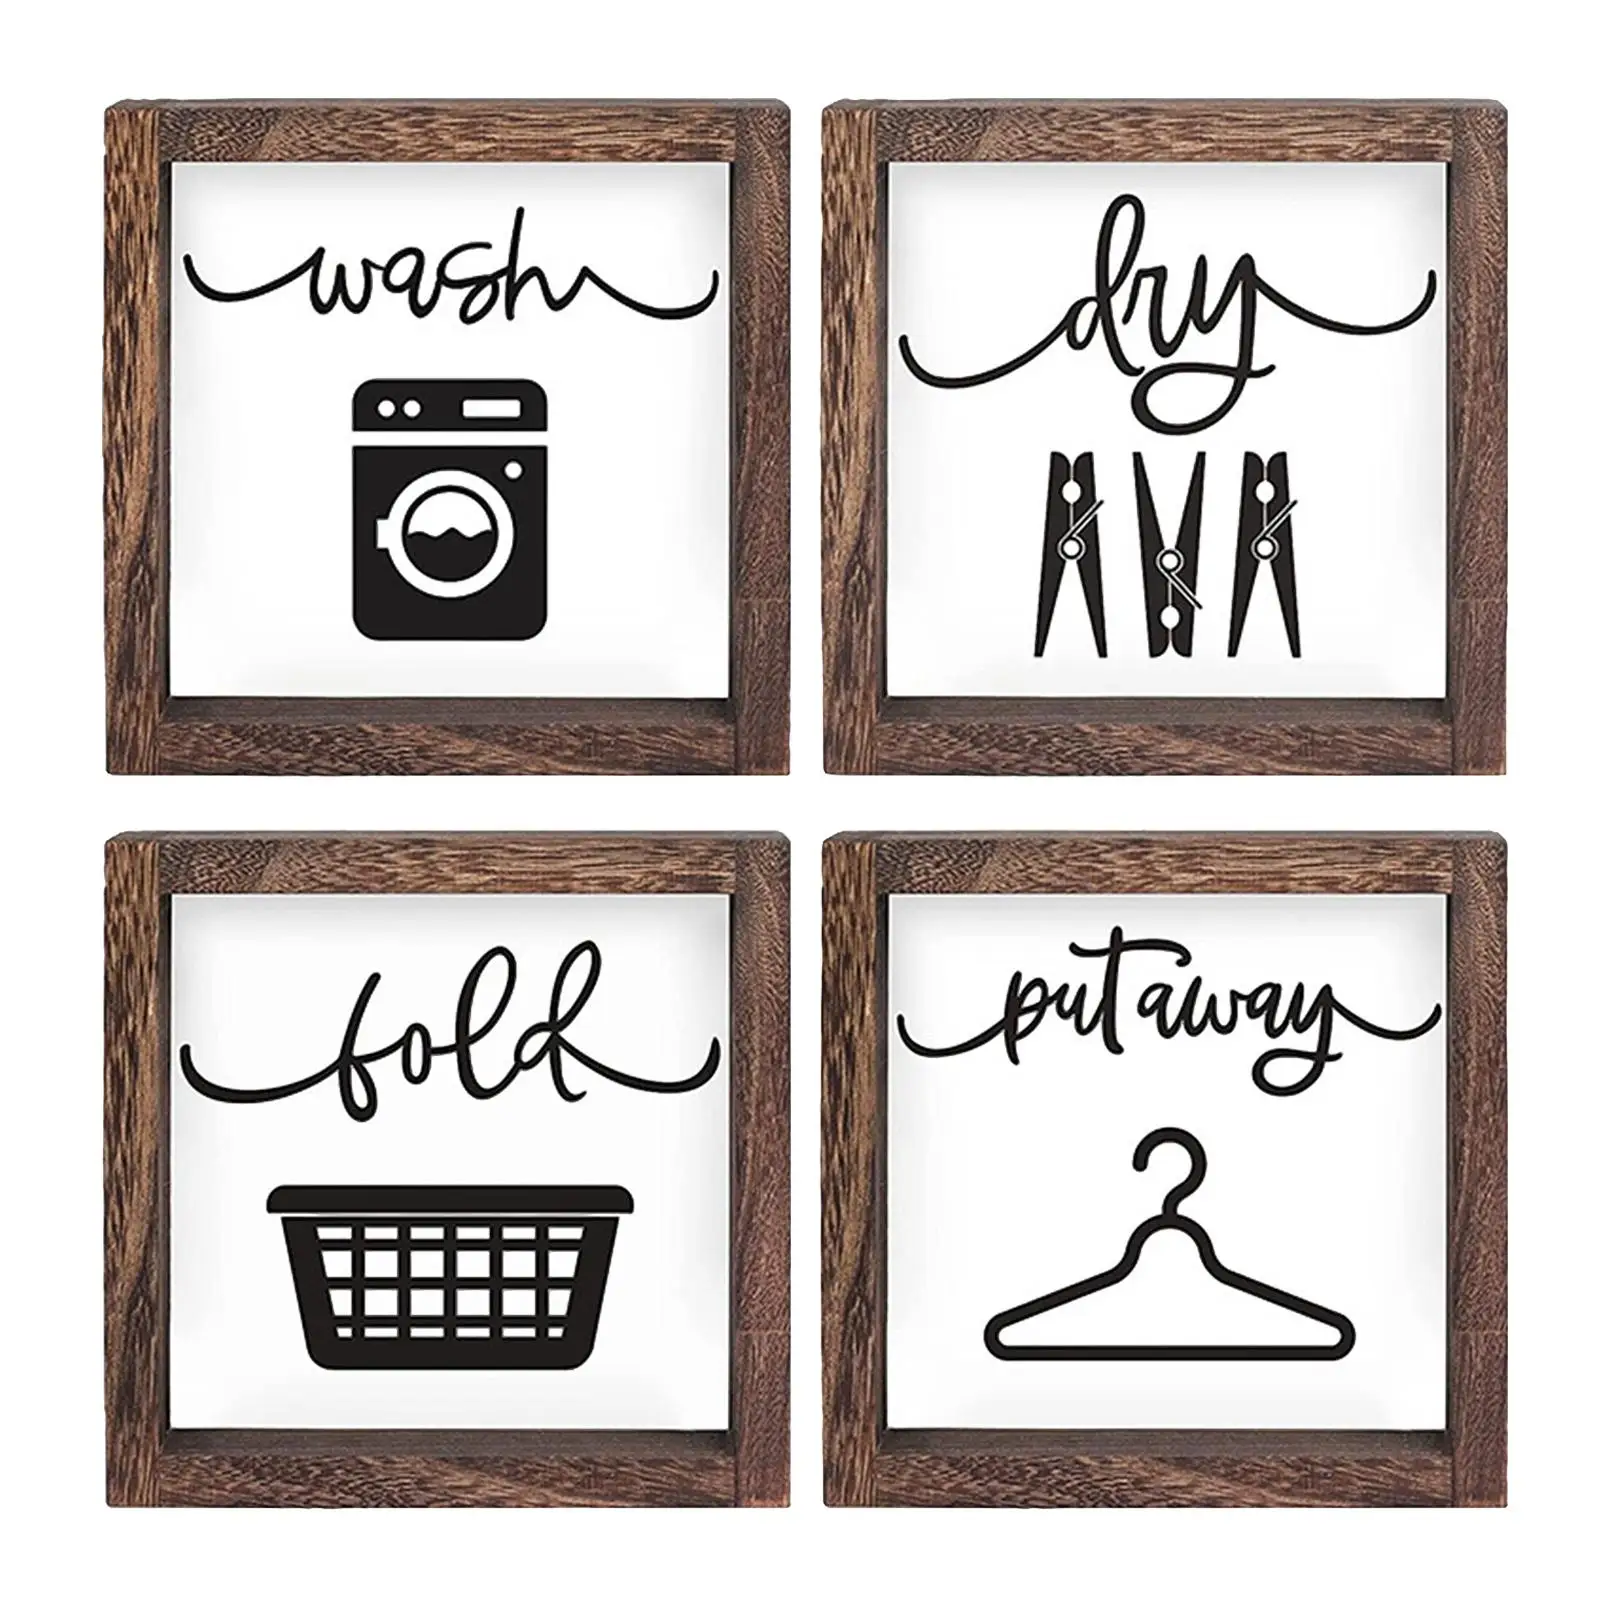 4x Wooden Picture Frame set Sign Tabletop and Wall Display Photo Frames for Birthday Gift Photo Gallery Wedding Bedroom